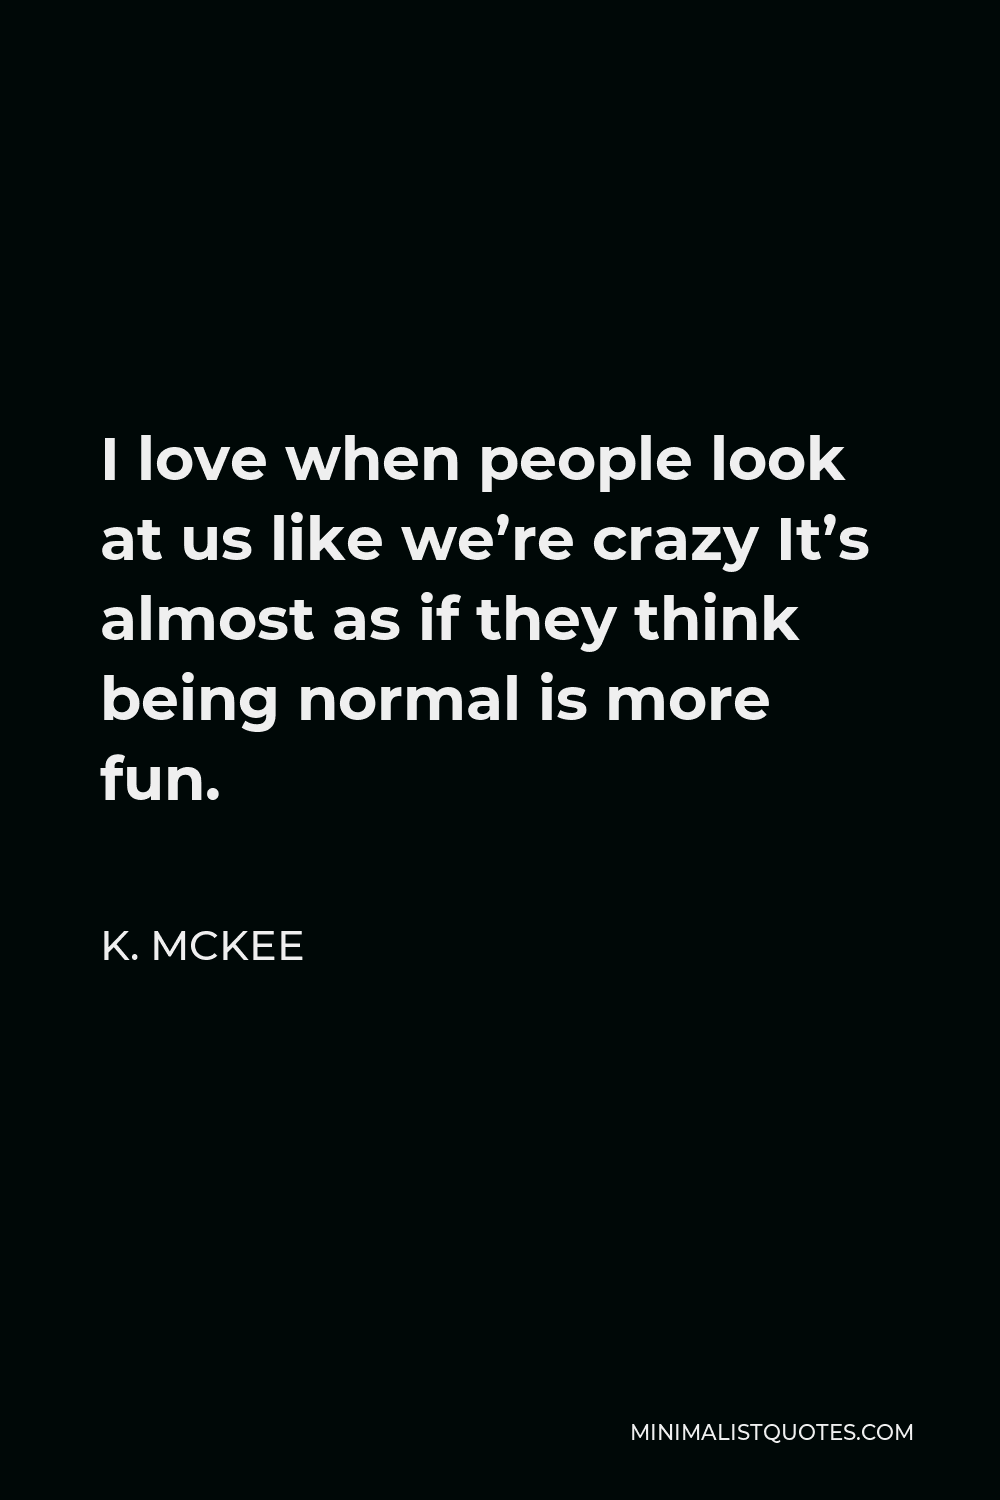 K. Mckee Quote - I love when people look at us like we’re crazy It’s almost as if they think being normal is more fun.